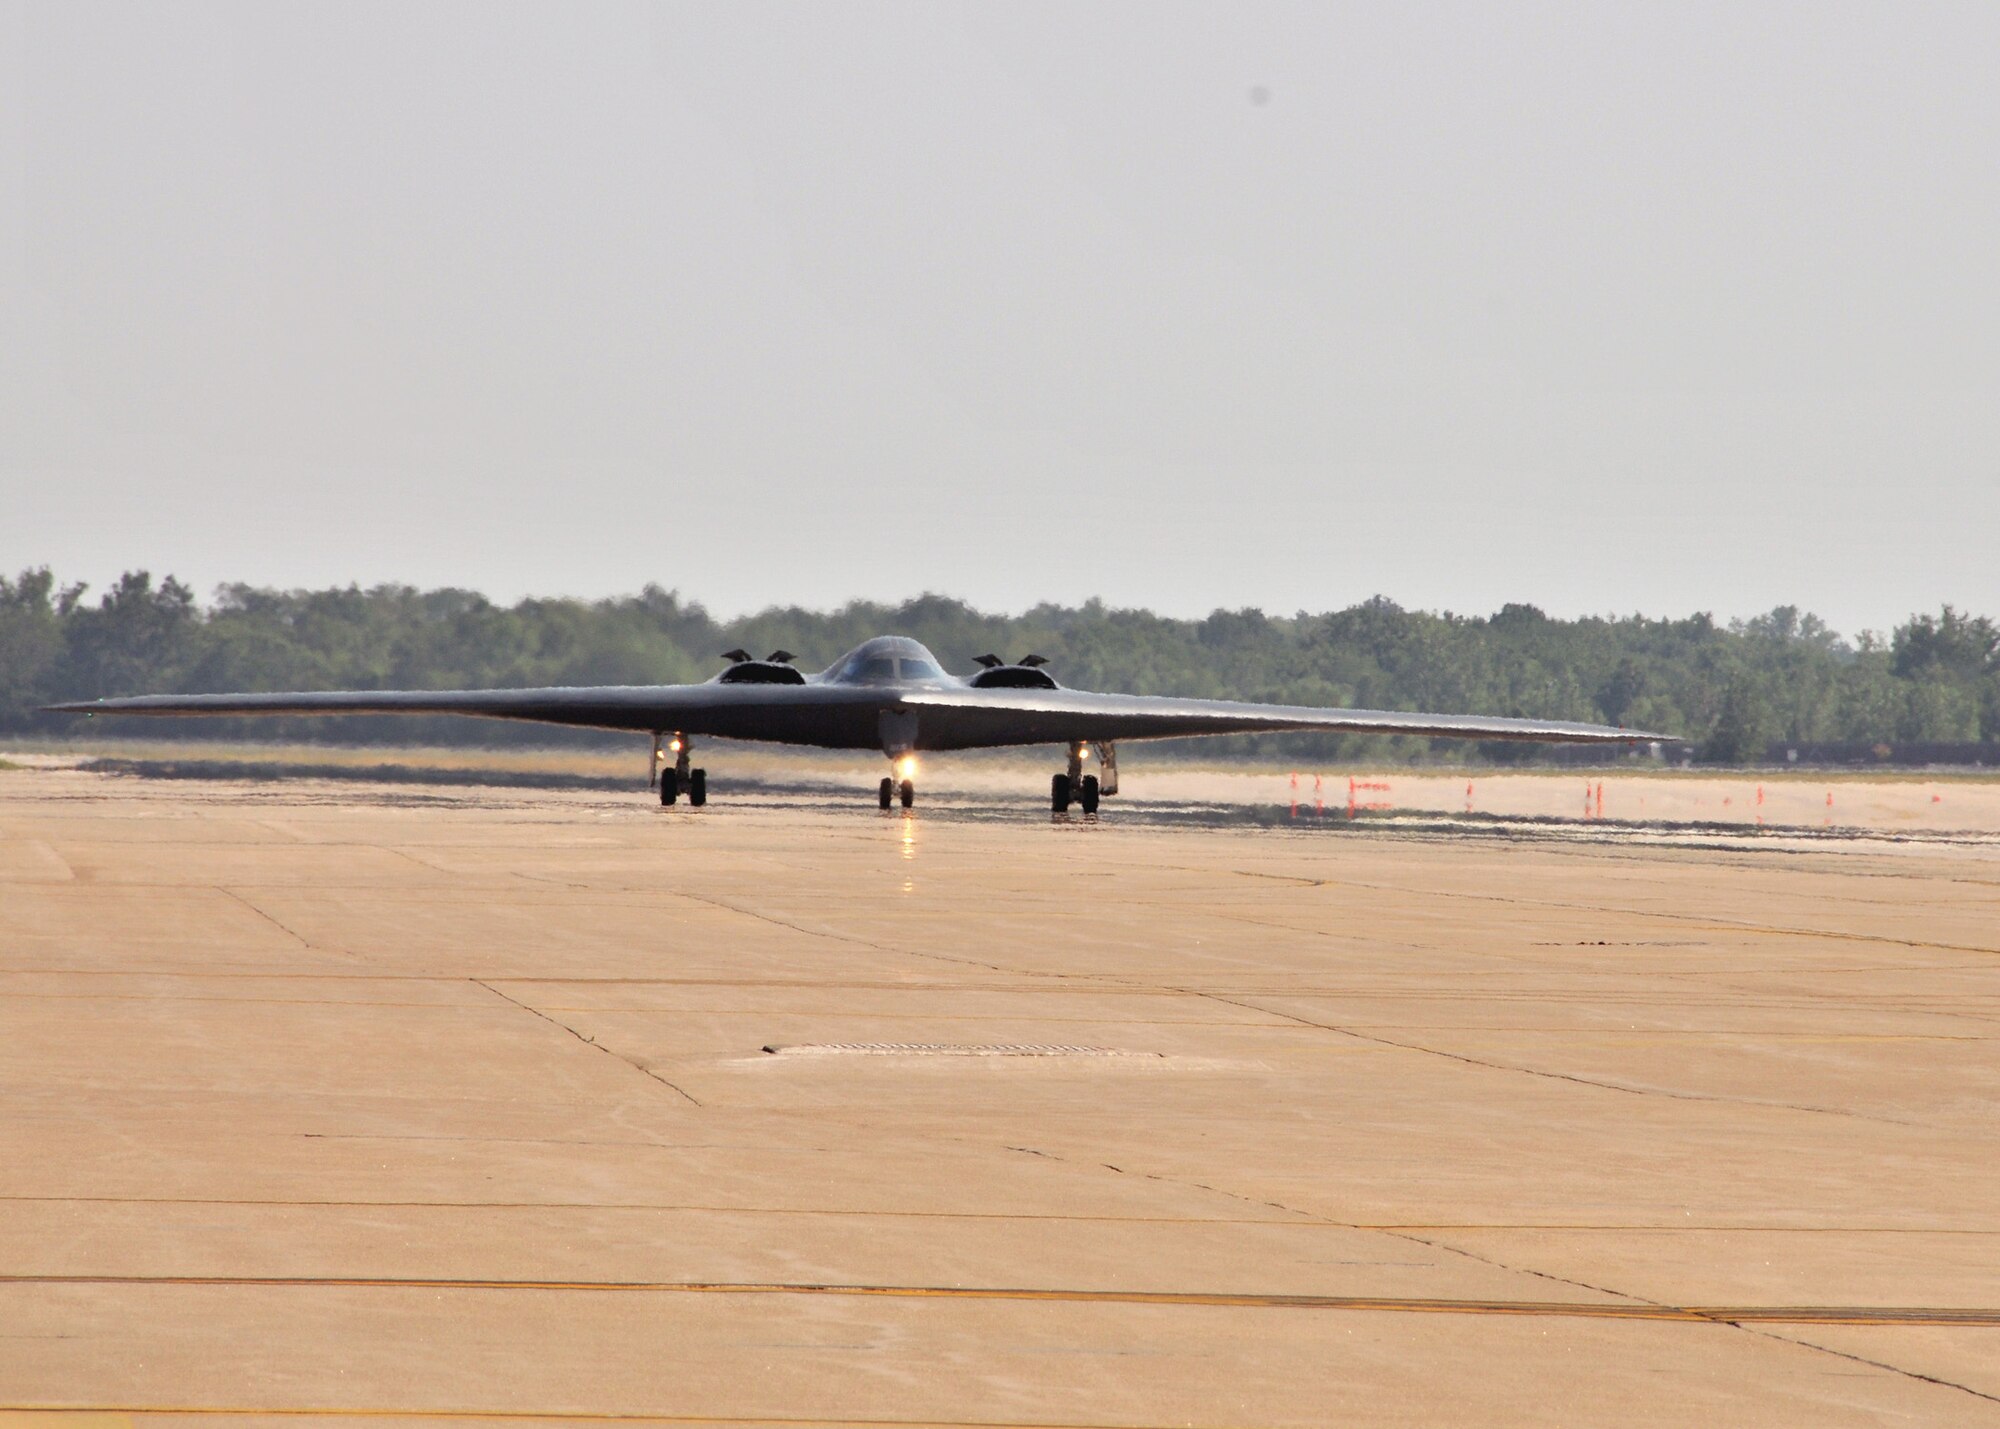 The B-2 "Spirit of Ohio" returns from a training mission, June 27.  Onboard, Lt. Col. Dave Thompson who with this mission, surpasses 1000 flying hours in a B-2 Stealth Bomber.  Thompson joins an elite group, which includes his co-pilot Maj Kennish.  Just two weeks prior, Maj Geoffrey Billingsley also flew past the 1000 flying hour mark.   Only 31 pilots have ever reached 1000 B-2 hours, and just thirteen still actively fly the B-2 Stealth Bomber.  Seven of these elite pilots are 131st Bomb Wing Missouri Air National Guard members at Whiteman Air Force Base:  Lt. Col. Rhett Binger,  Lt. Col. Mike Pyburn, Lt. Col. Dave Thompson,  Maj. Jared Kennish, Maj. John Avery,  Maj. Geoffrey Billingsley, and Lt. Col. Mike Means, who has over 1500 flying hours. (National Guard Photo by Senior Master Sgt. Mary-Dale Amison.  RELEASED)